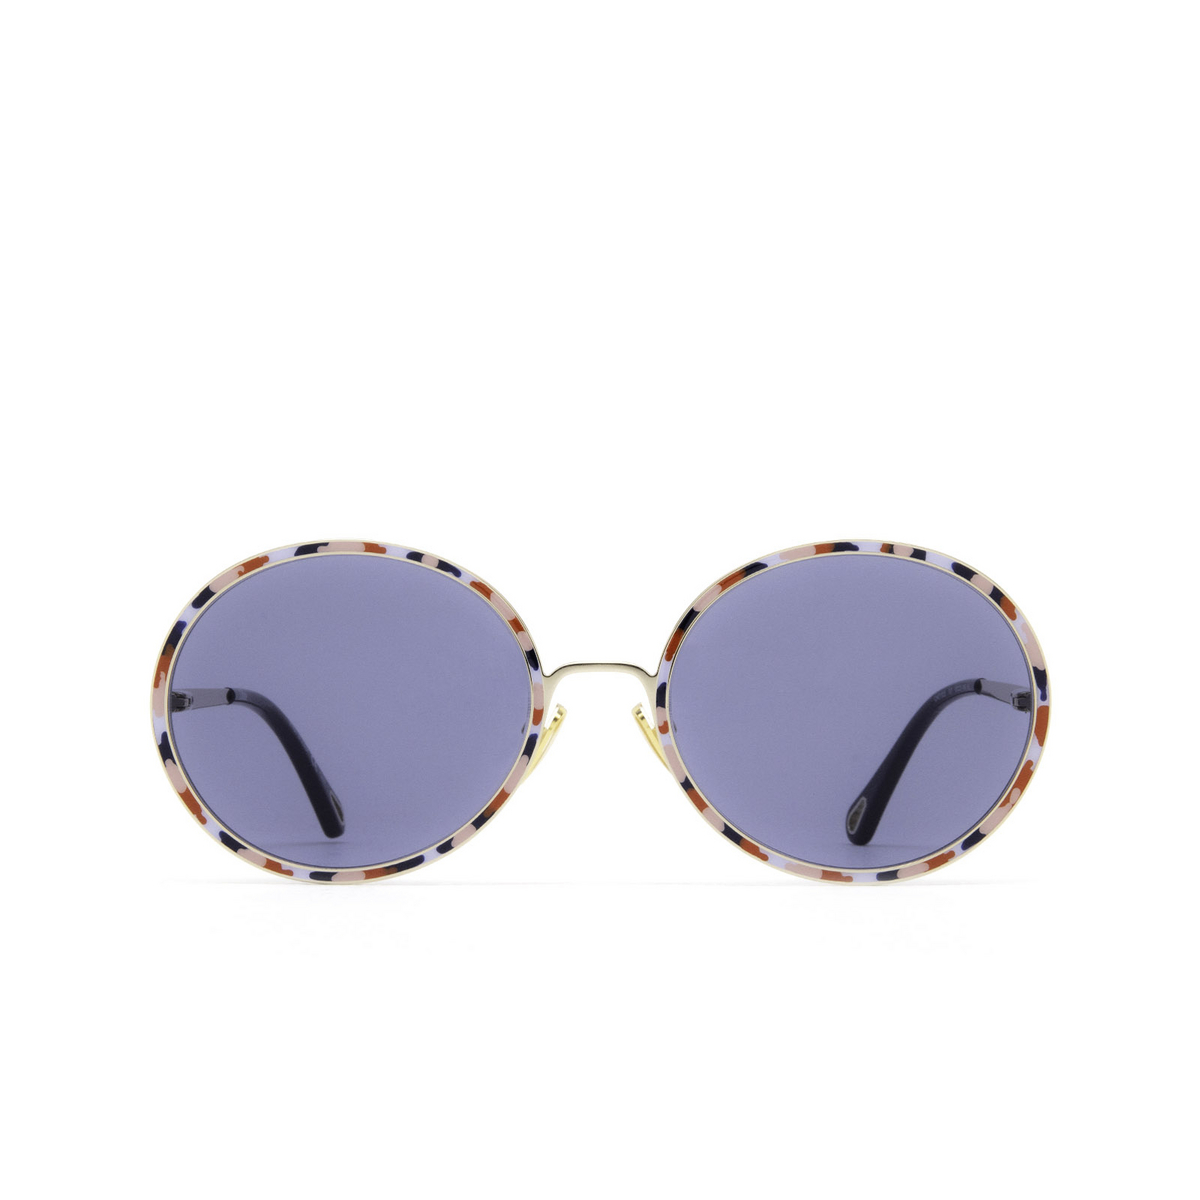 Chloé® Round Sunglasses: Vitto Oval CH0100S color Gold 001 - front view.